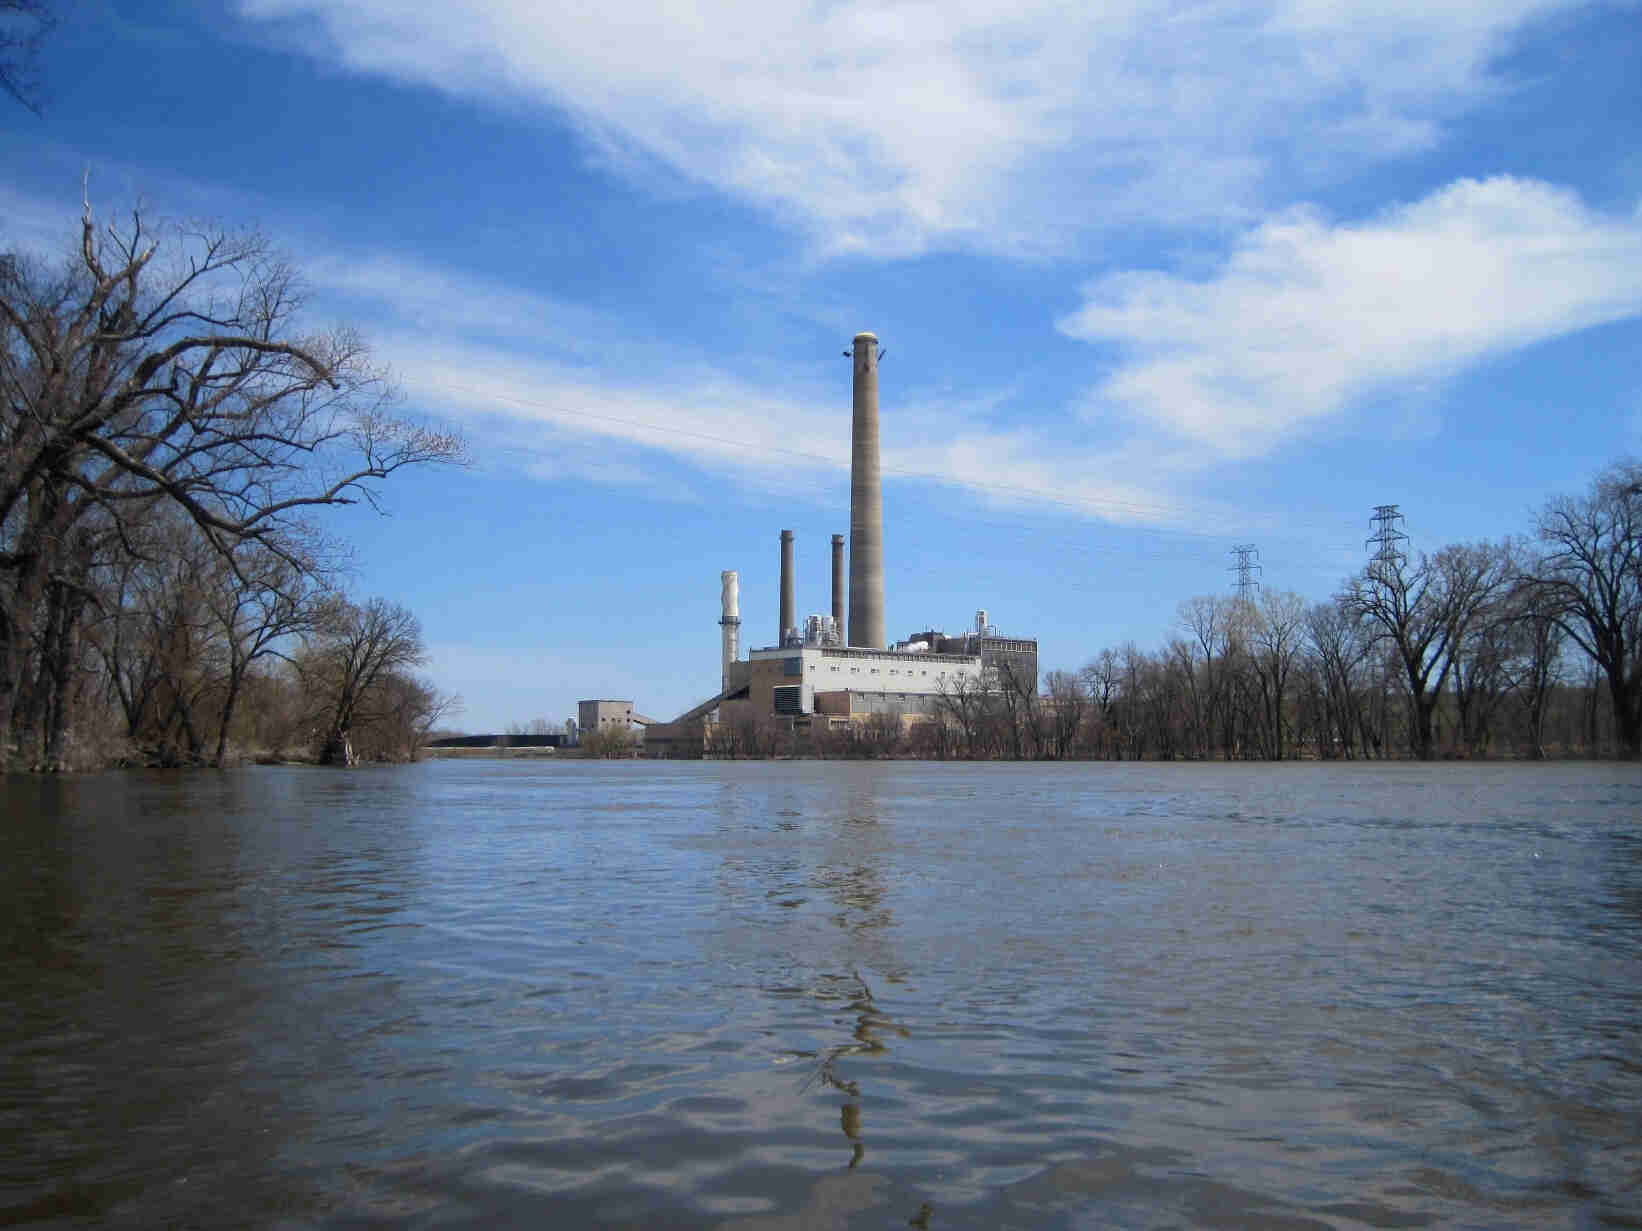 View from the middle of a river with bare trees on the sides of it, and a building with a smoke stack ahead